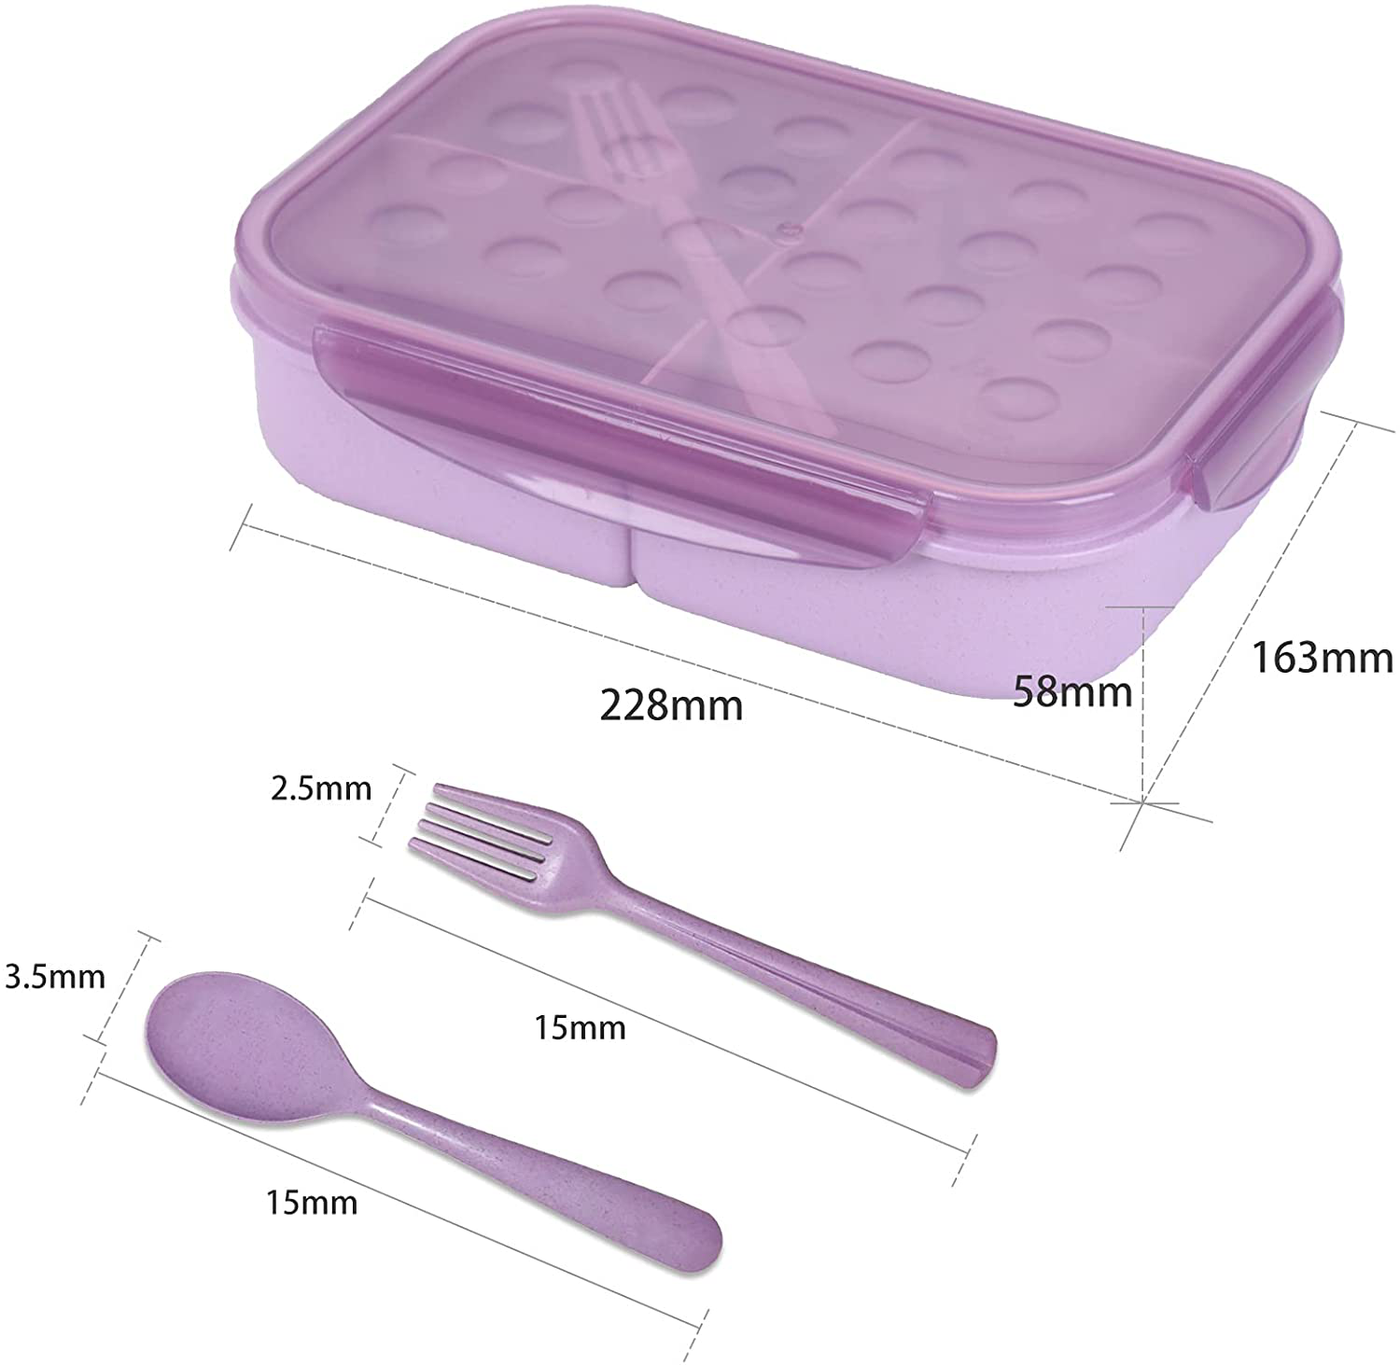 Bento Box, ASYH 3 Compartment Japanese Lunch Box Reusable Lunch Dinner Containers with Fork Spoon for Adults Kids School Office Food Grade BPA Free Microwave Safe (Green-1150ML)